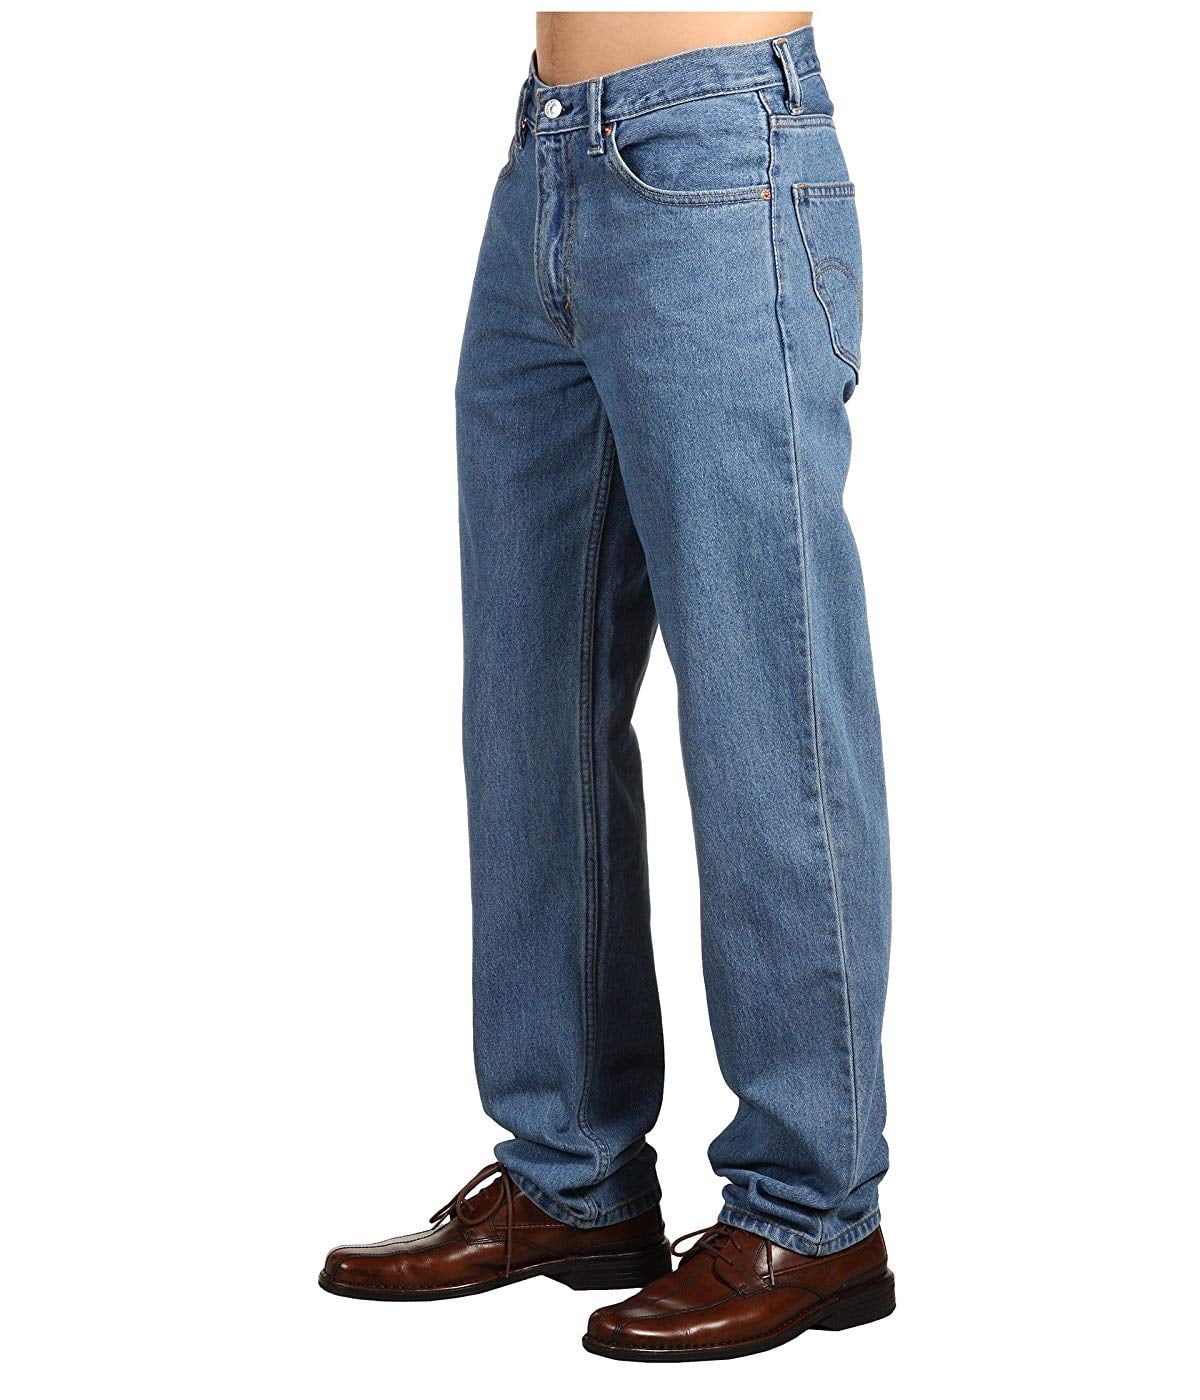 Men's Levi's 550 Relaxed Fit Jeans Bleach